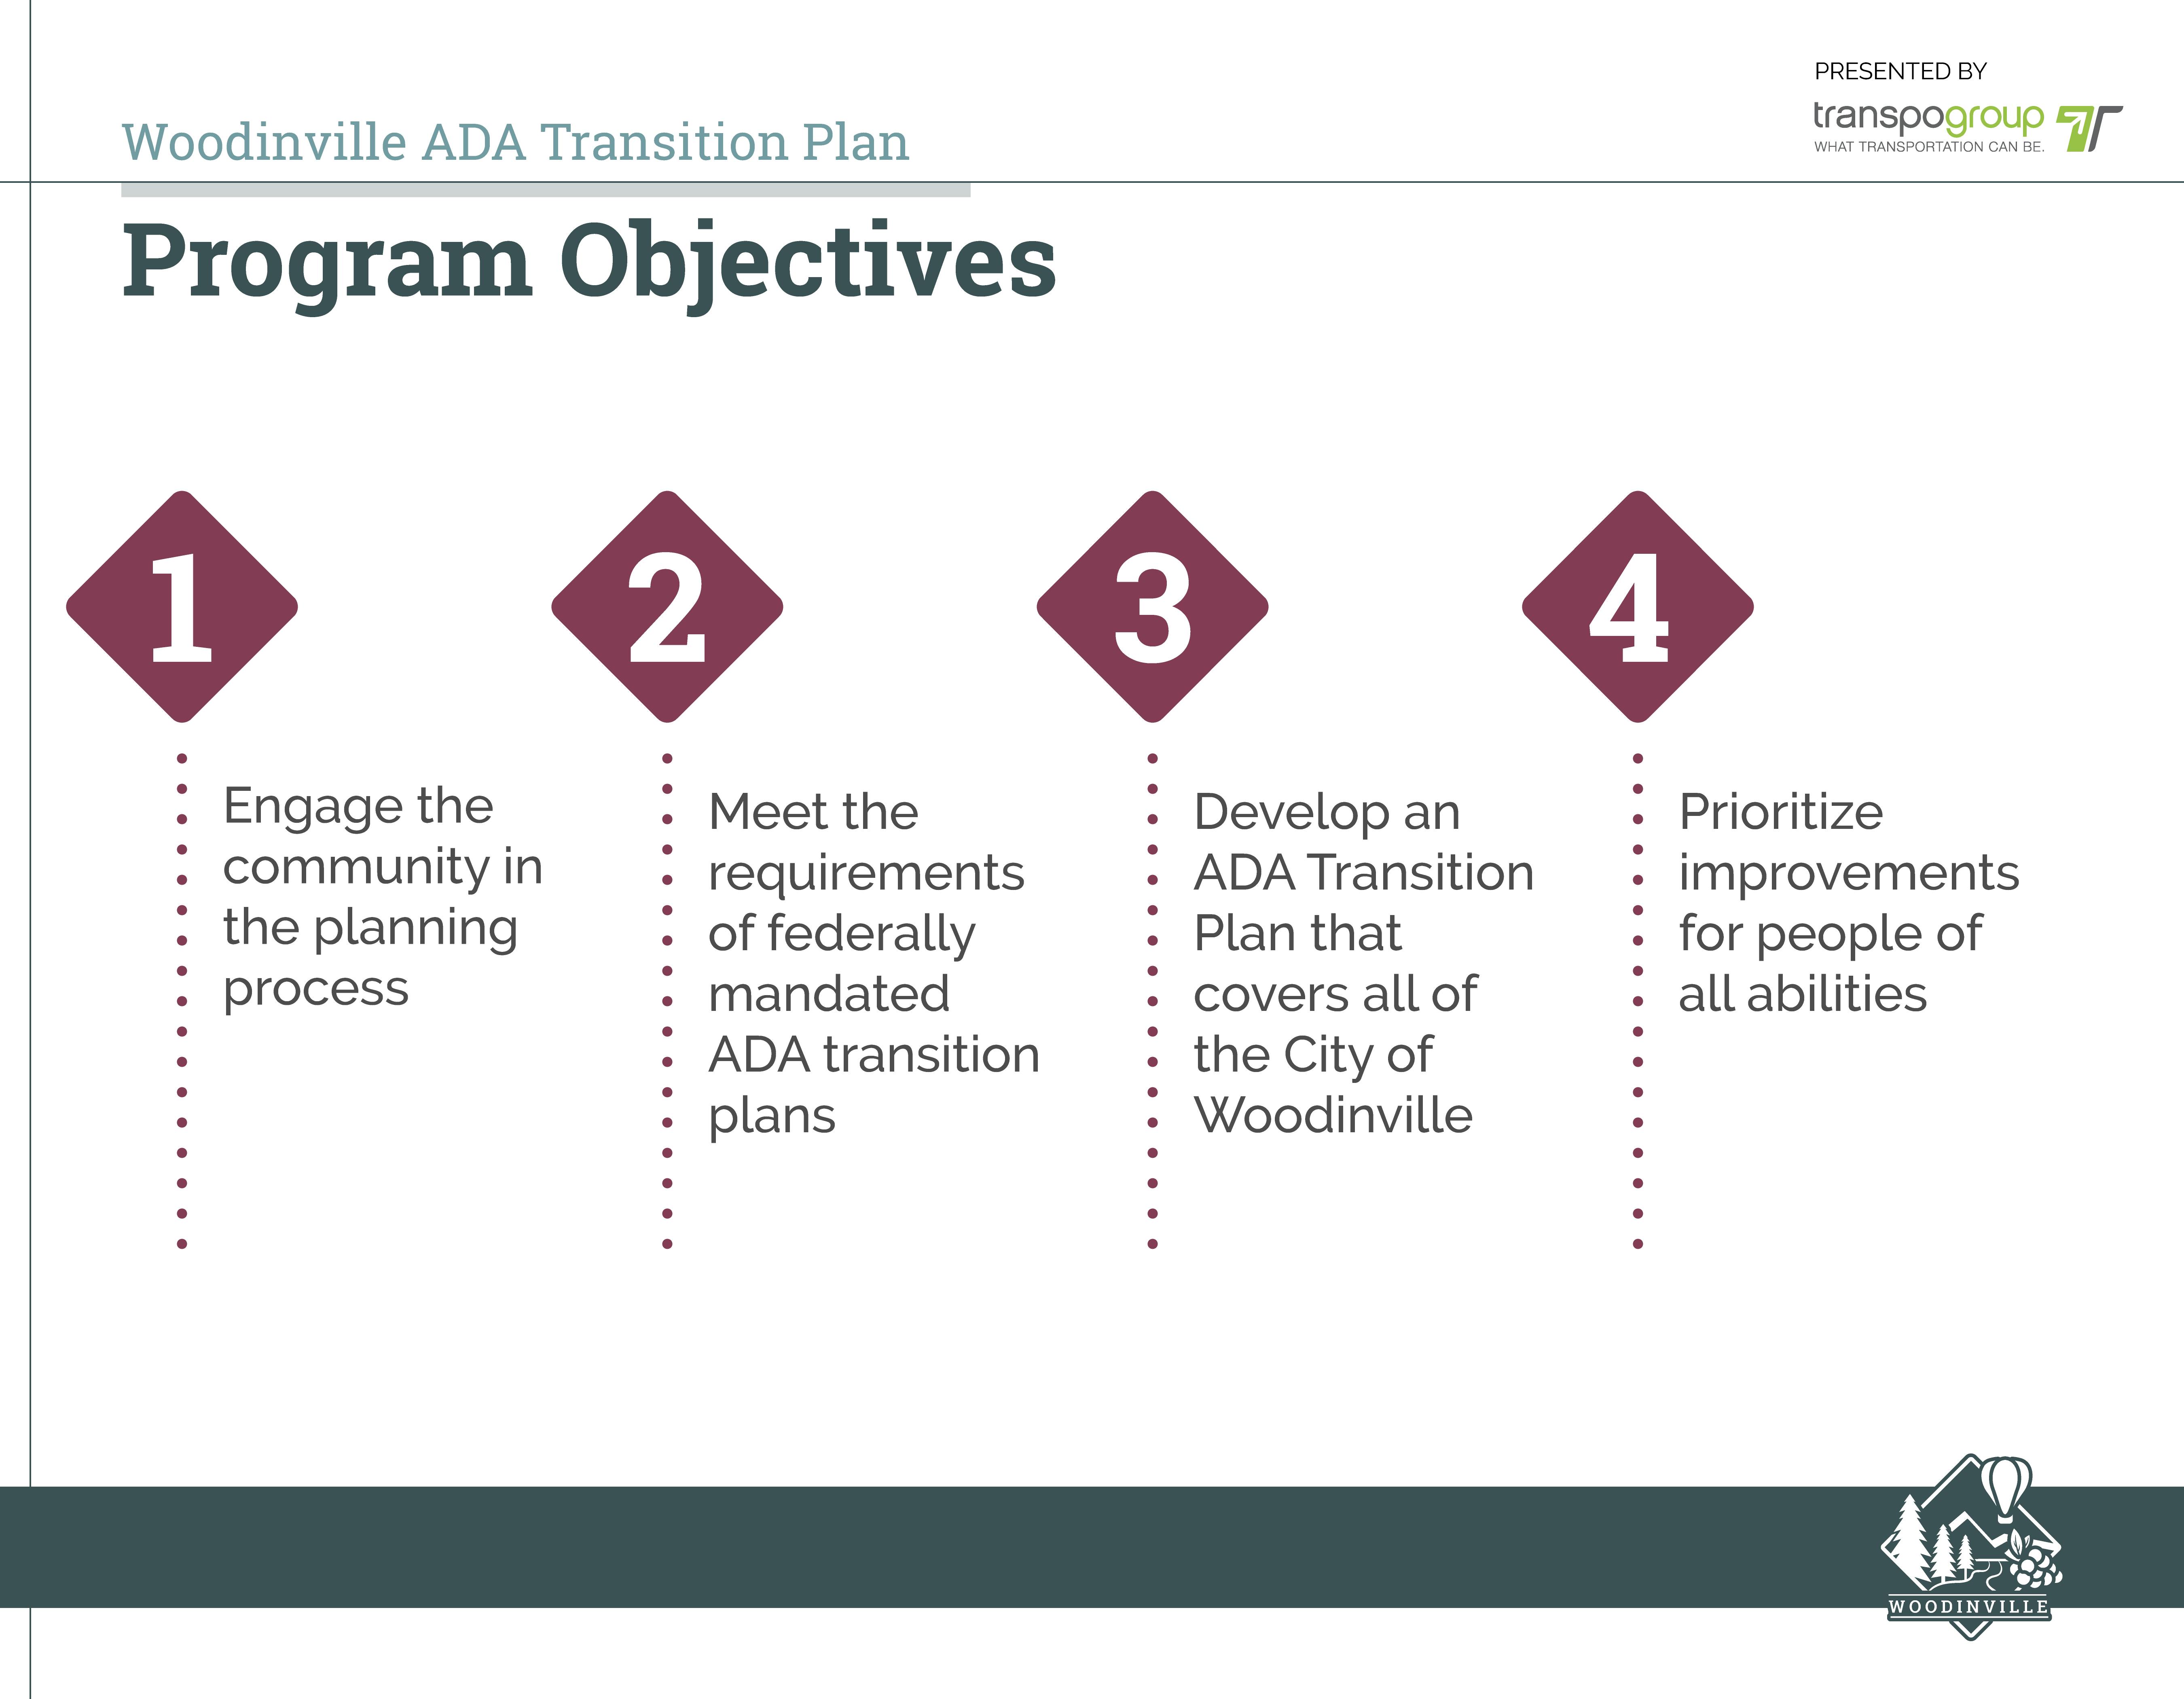 Woodinville ADA Overview